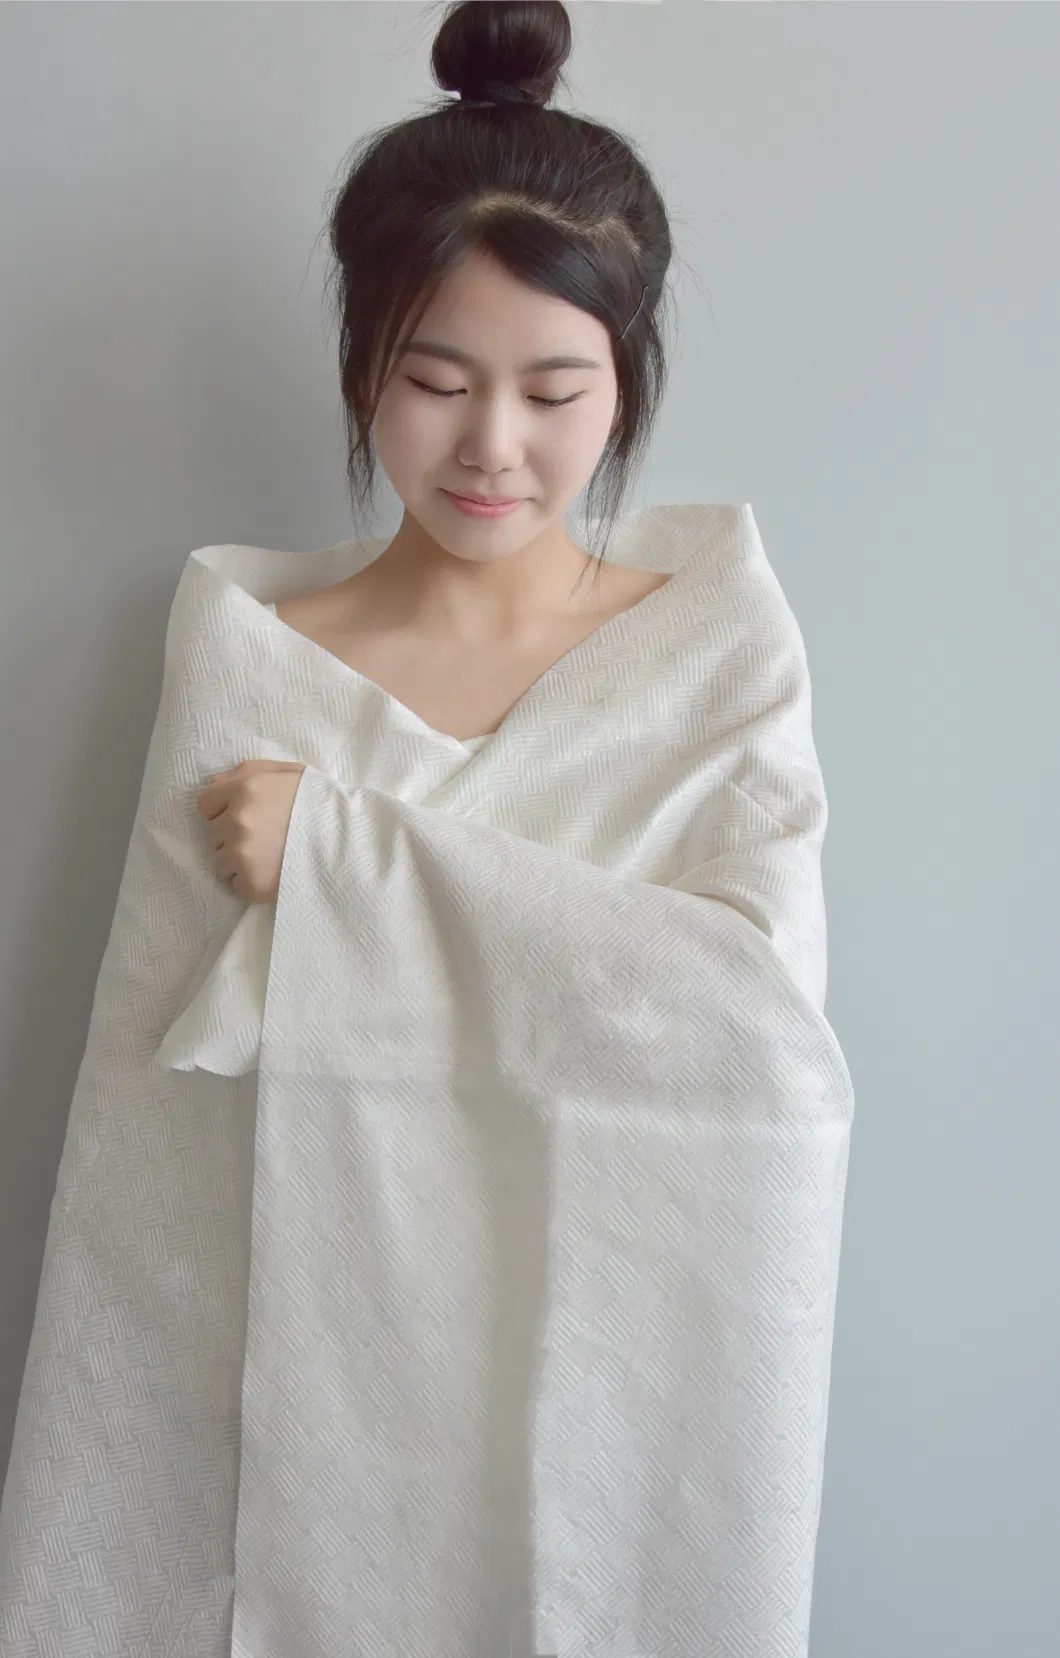 Disposable Bath Towel Face Towel Compressed Towel Bamboo